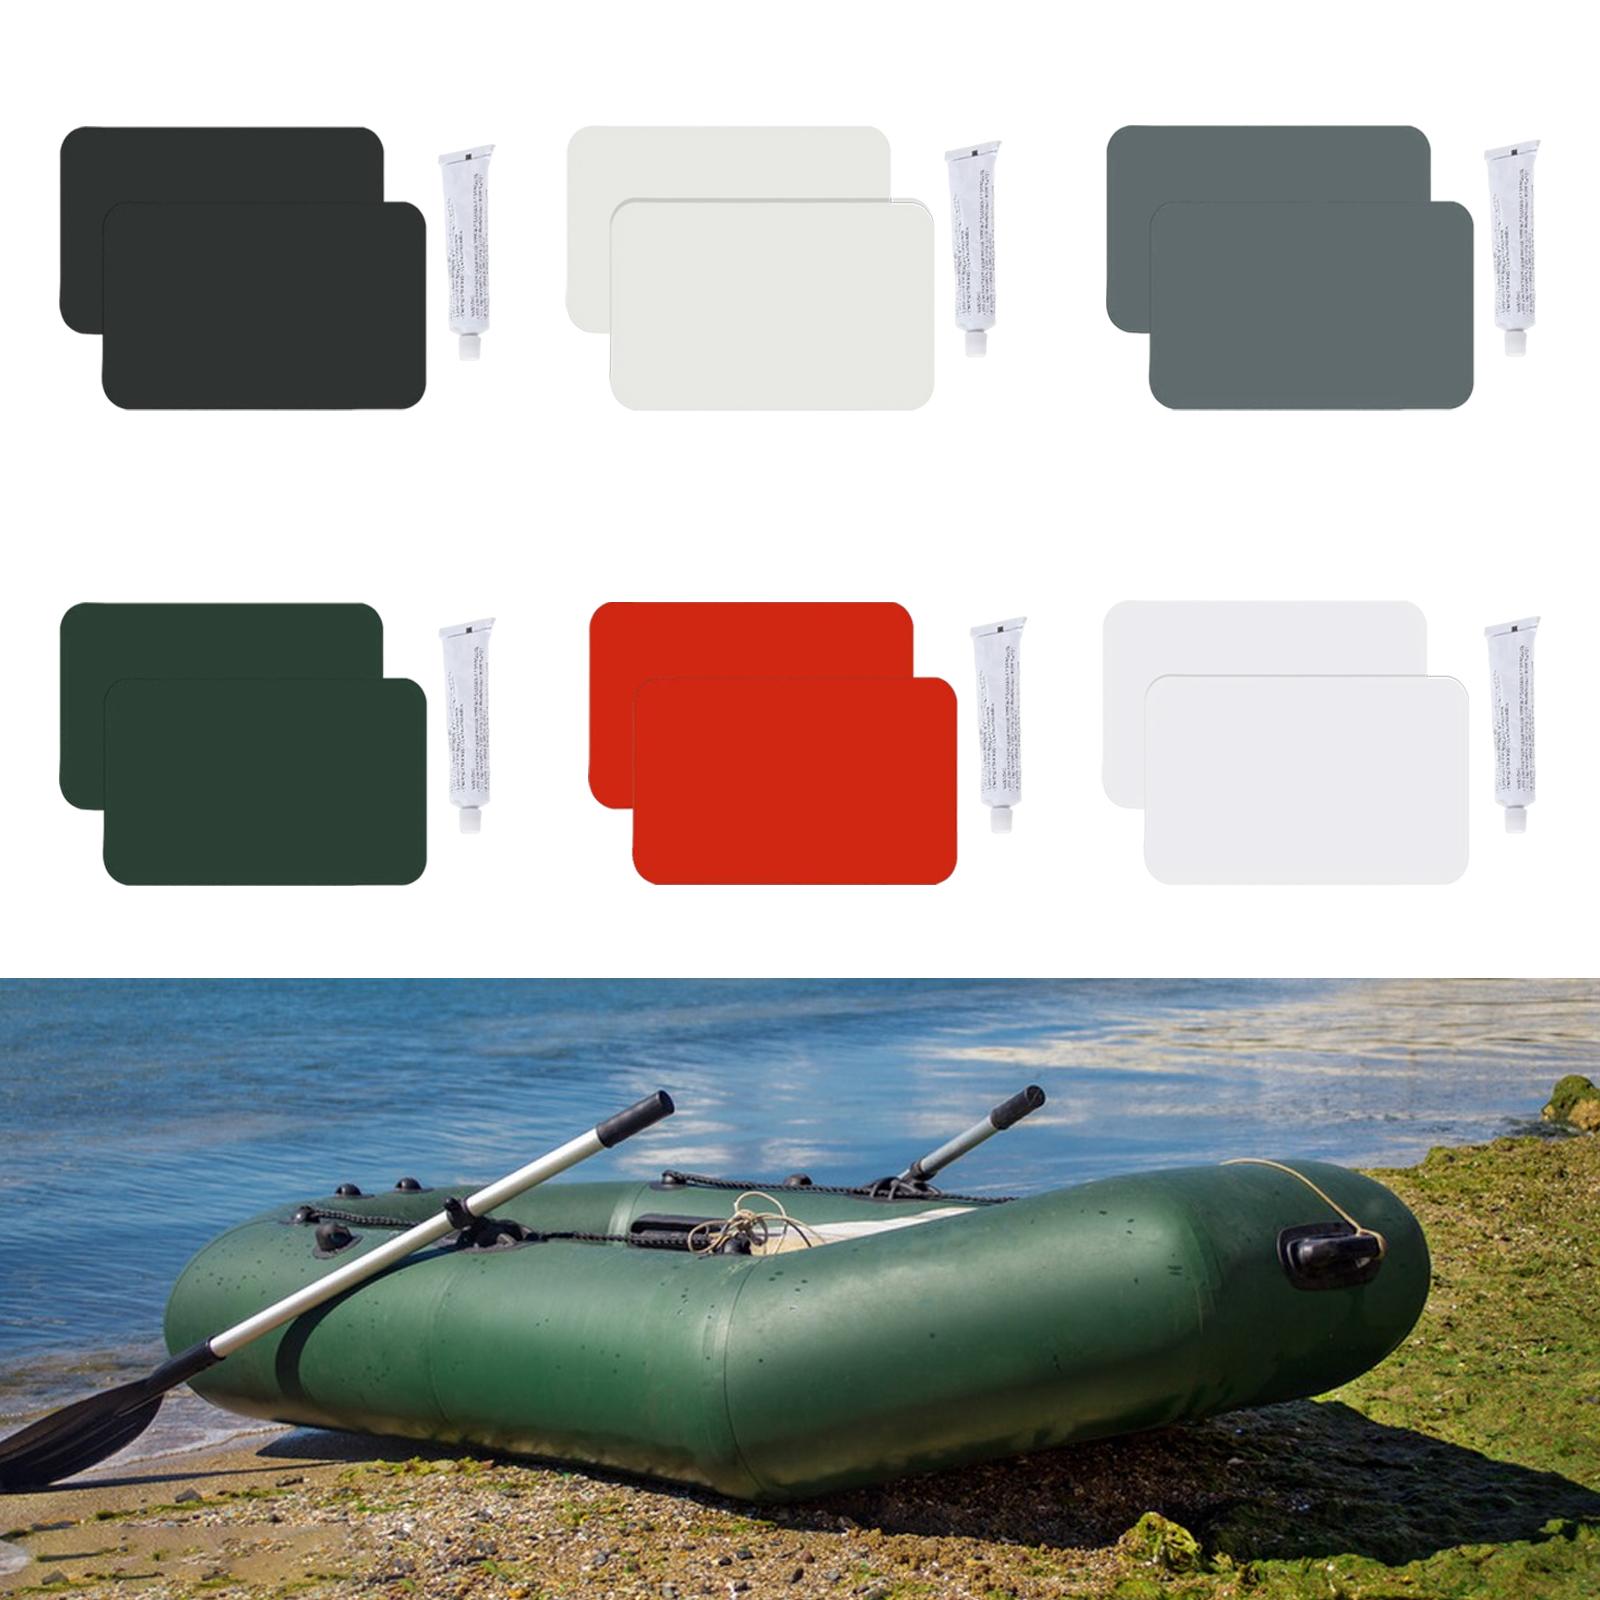 Inflatable Boat Repair Patch Kits Sturdy PVC Repair Patches Kit Sofa Kayak Patches for Holes in Kayak Waterproof